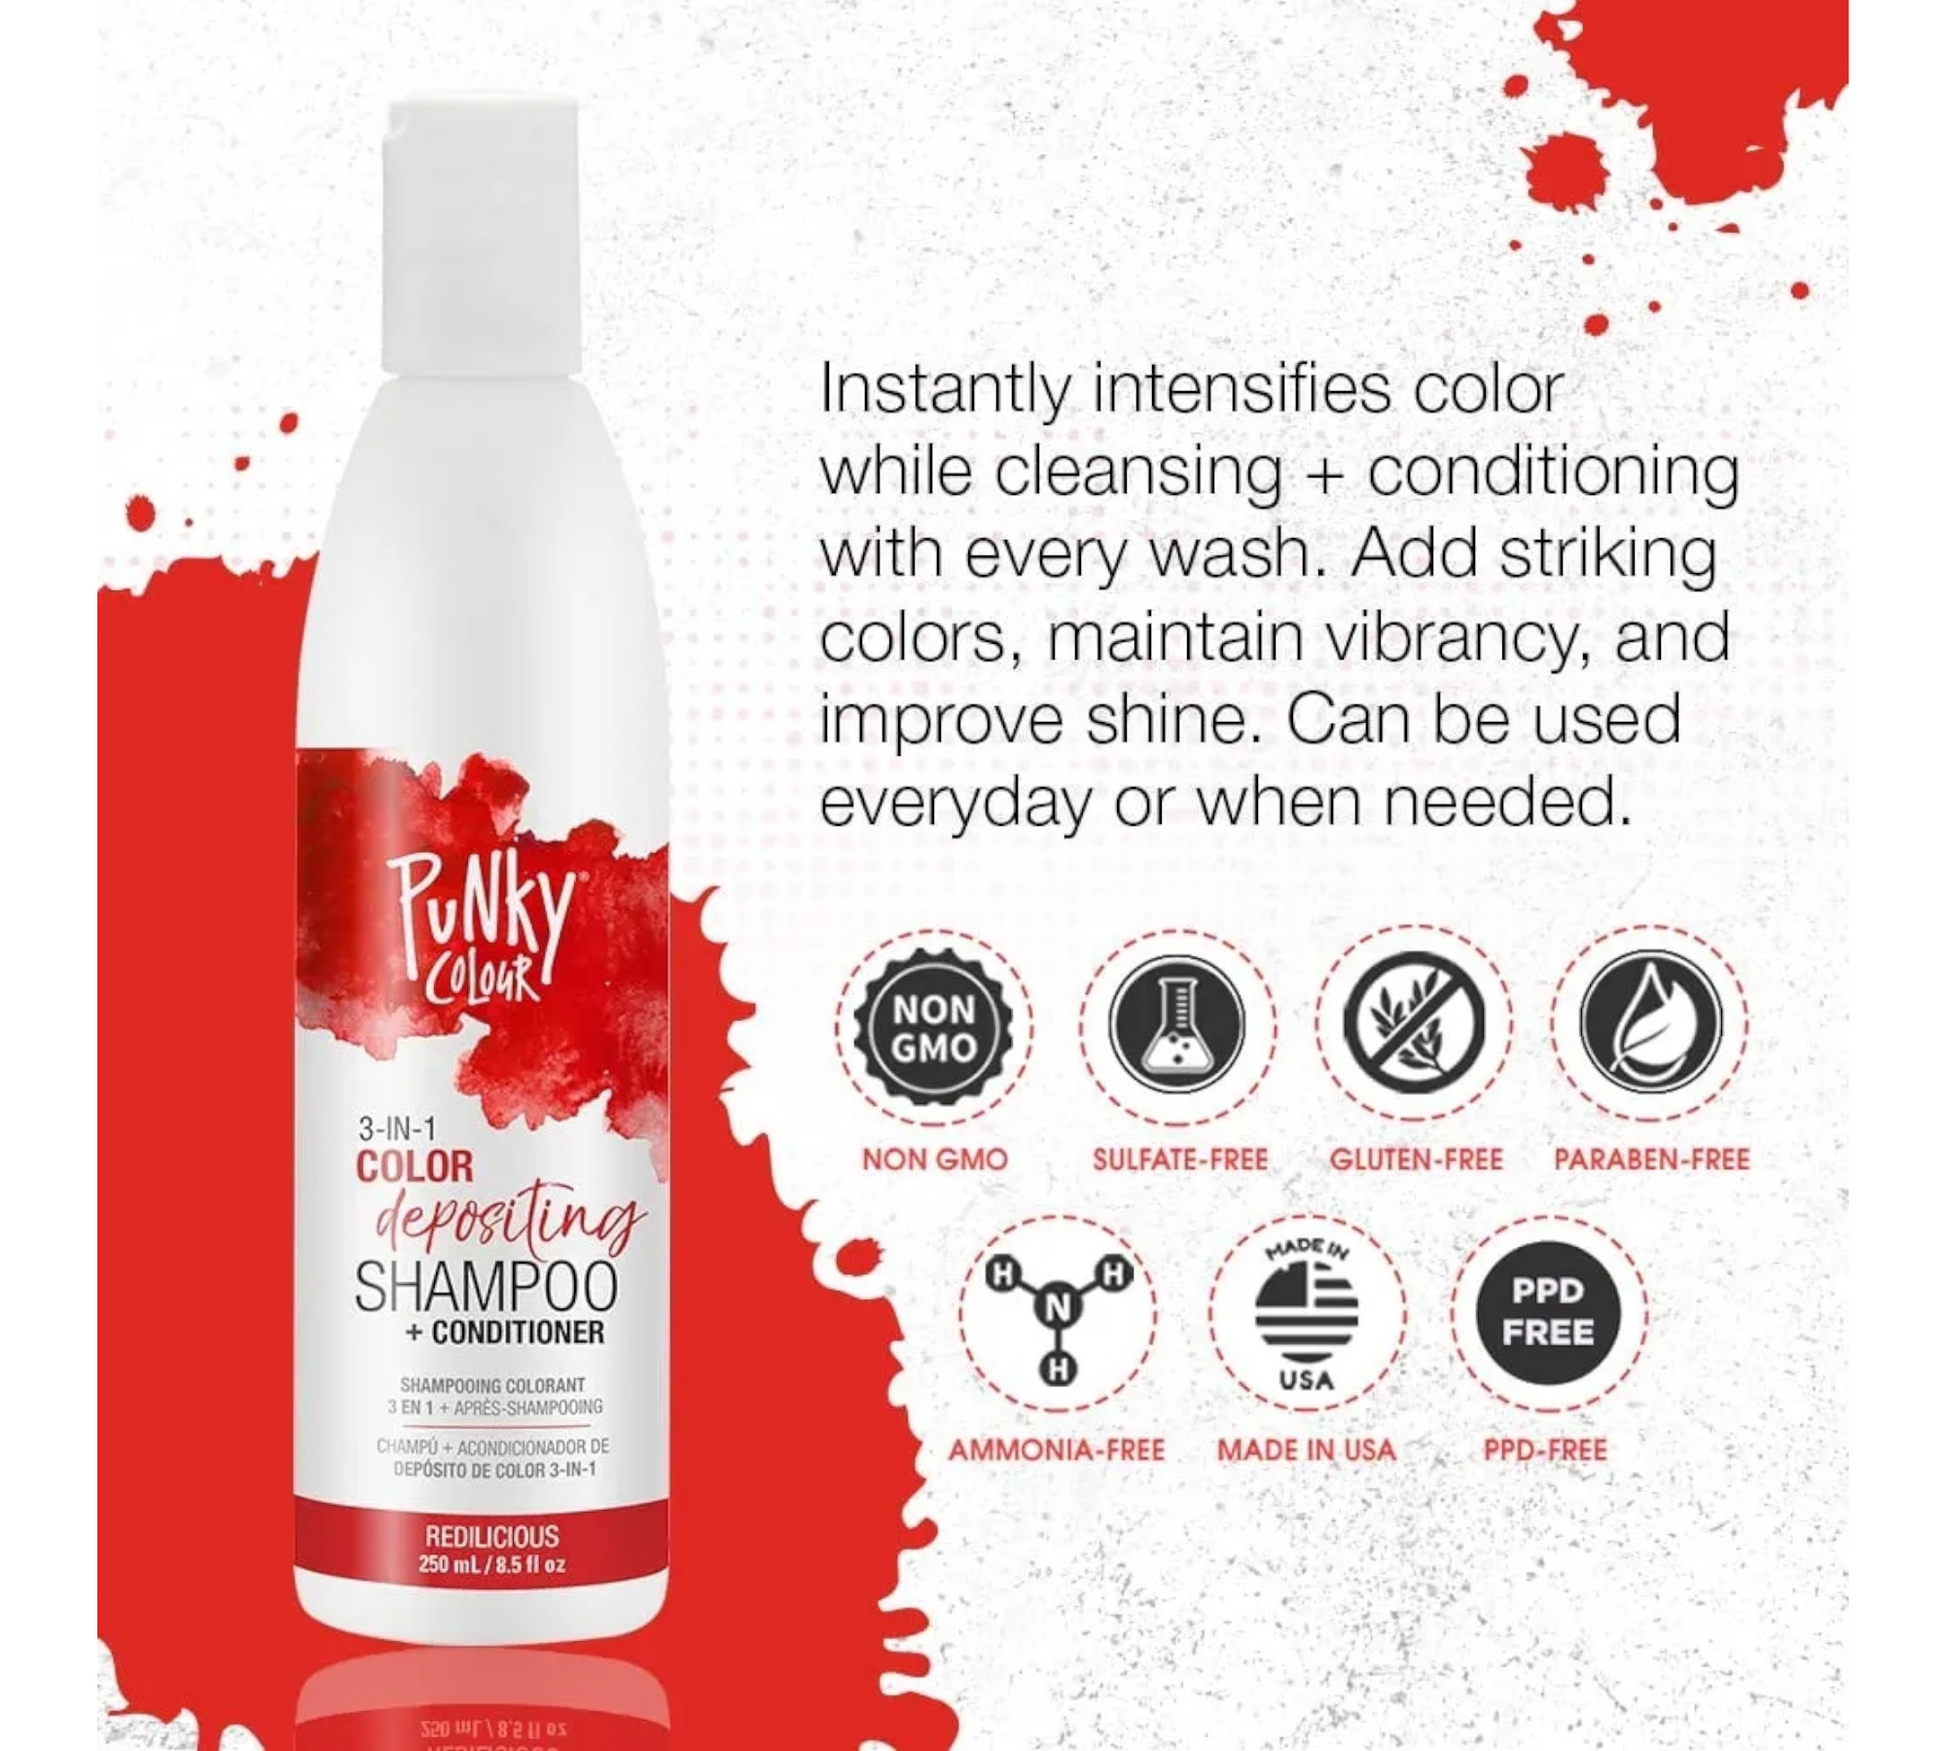 Punky Color Cupid Beauty Supplies Temporary Color Shampoos 3-In-1 Color Depositing Shampoo + Conditioner